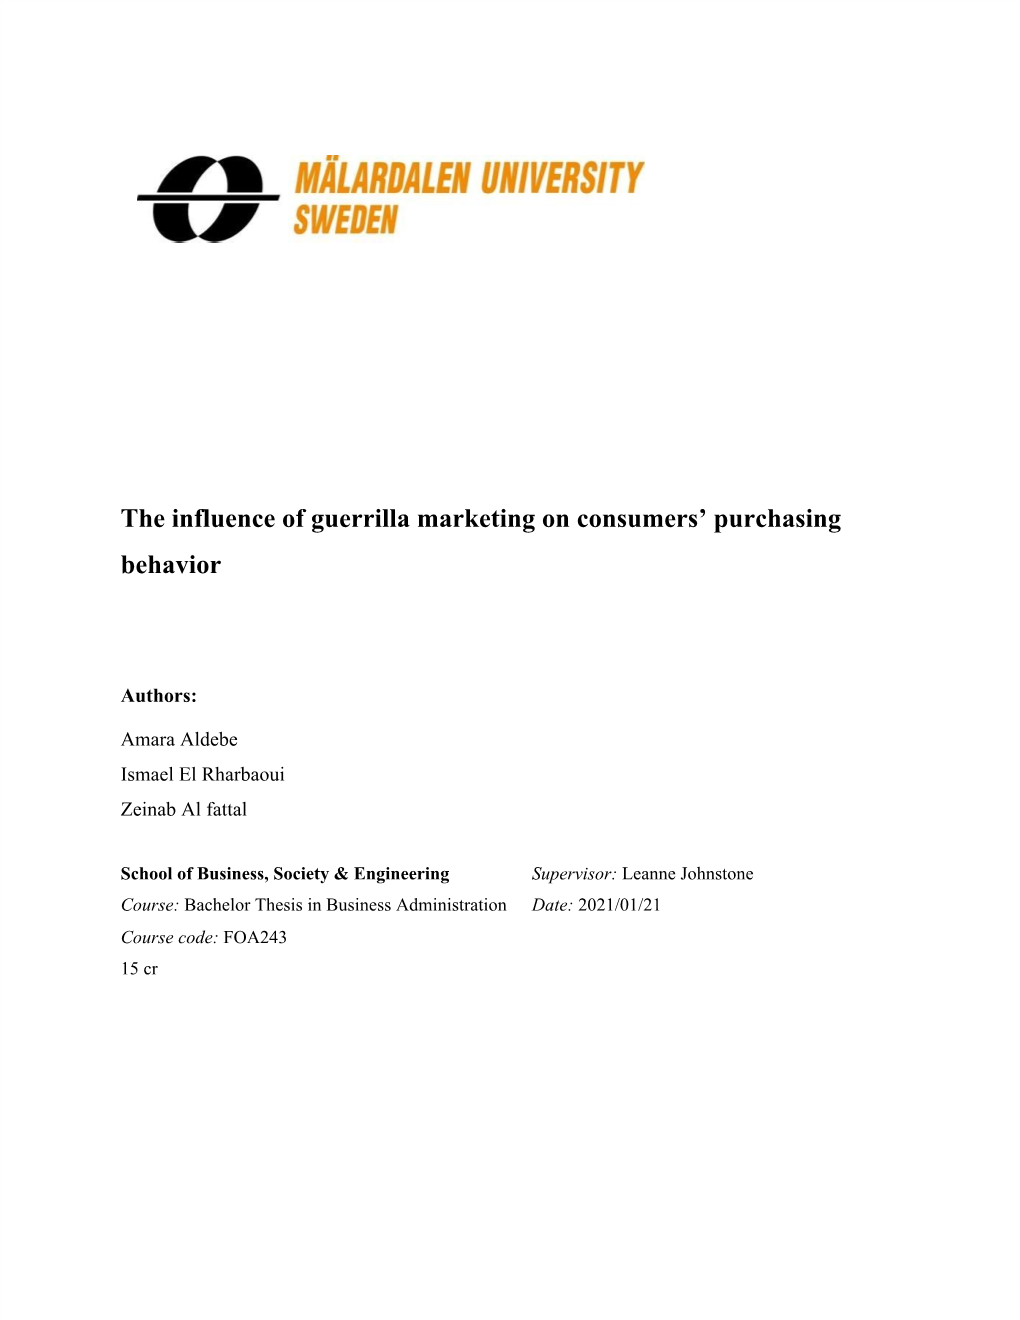 The Influence of Guerrilla Marketing on Consumers' Purchasing Behavior